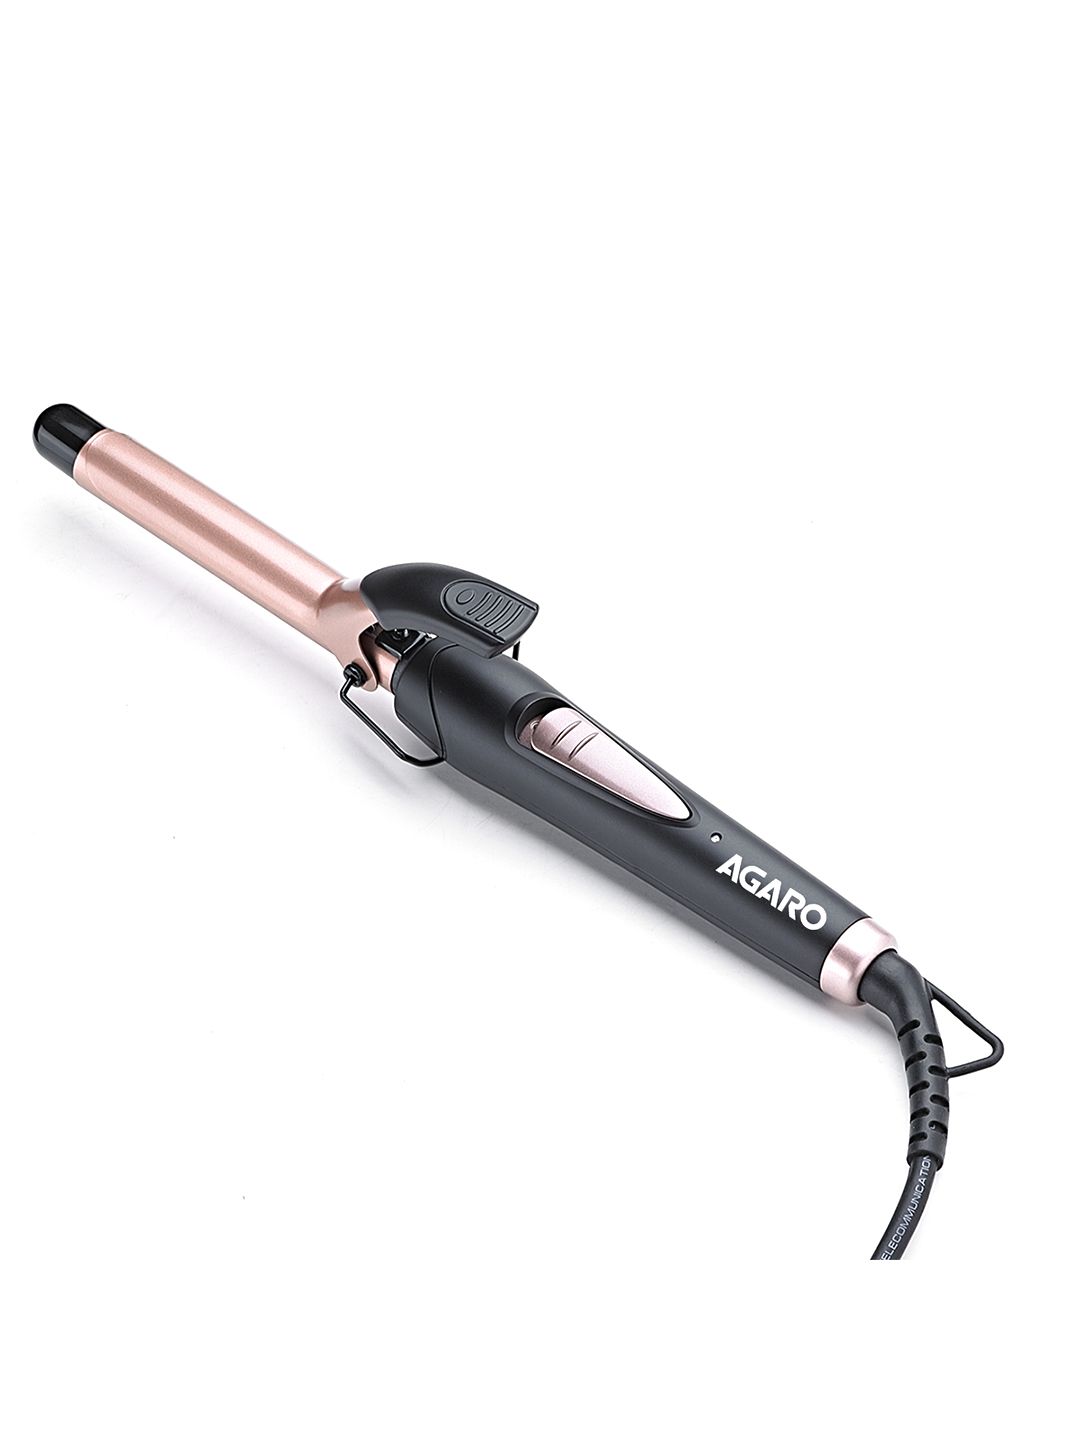 Agaro Hair Curler with 25mm Barrel- HC-6001 Price in India